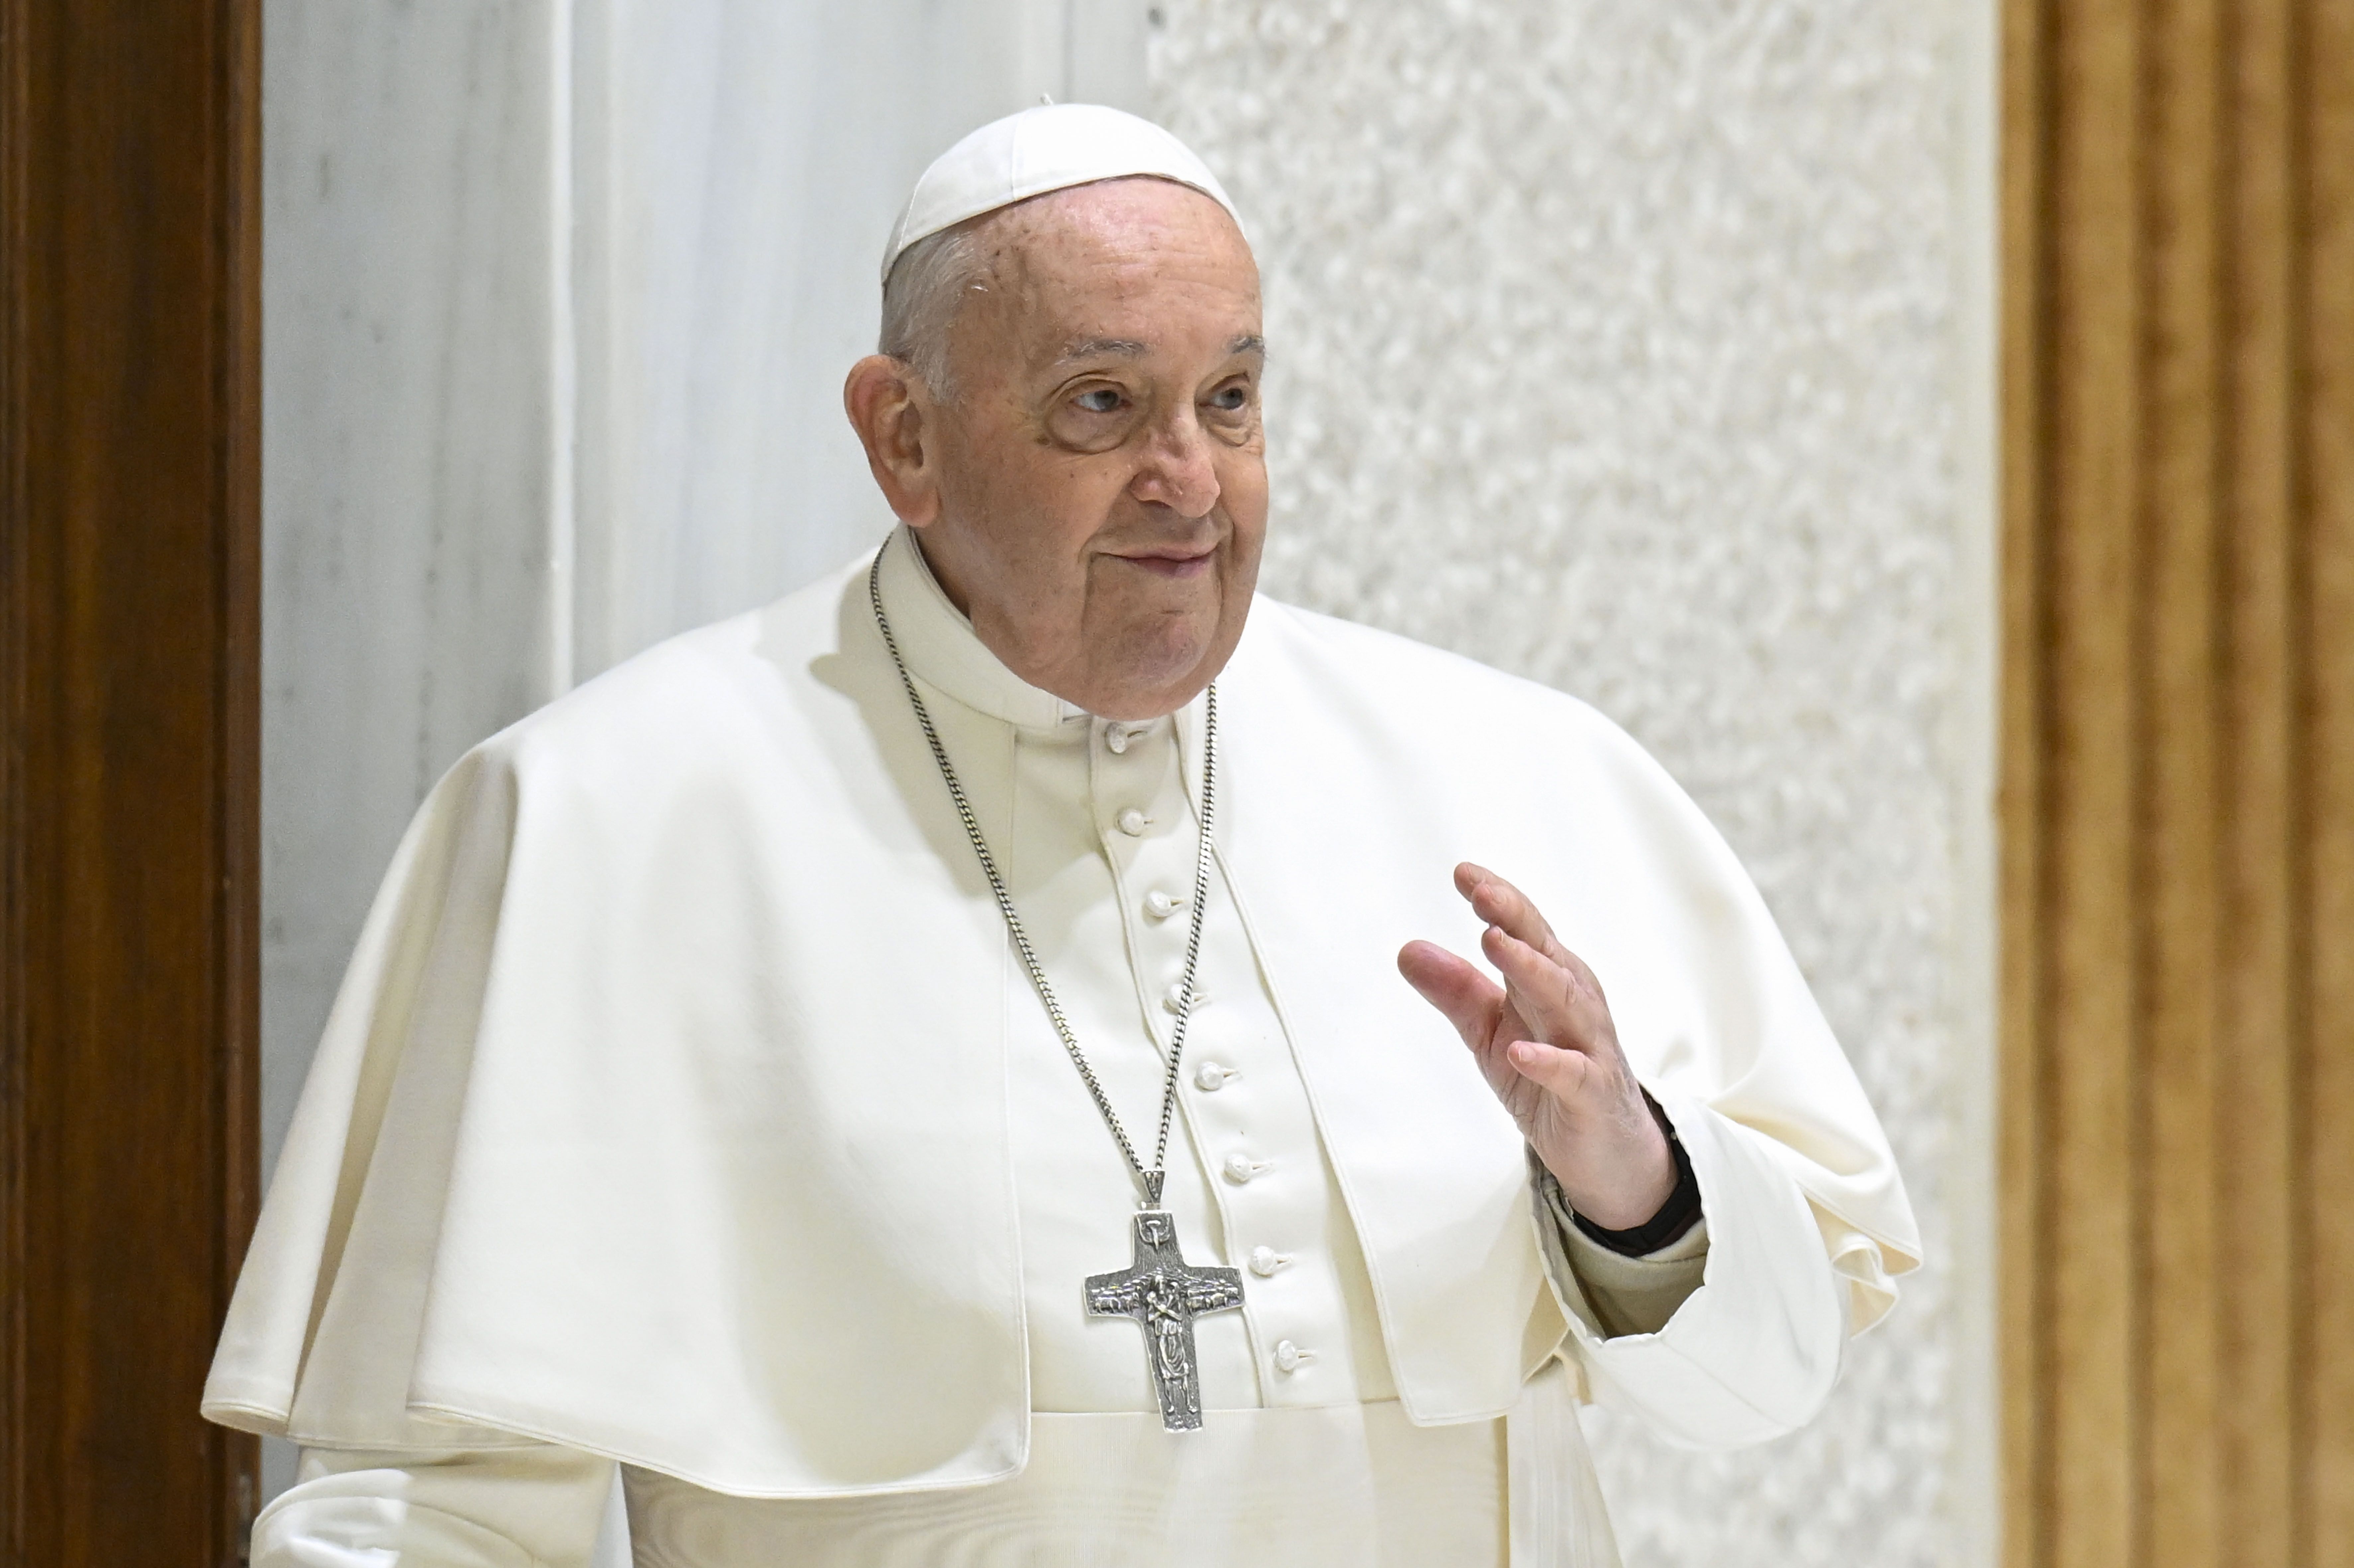 Pope Francis: To be ‘scandalized’ by gay couple blessings is ‘hypocrisy’